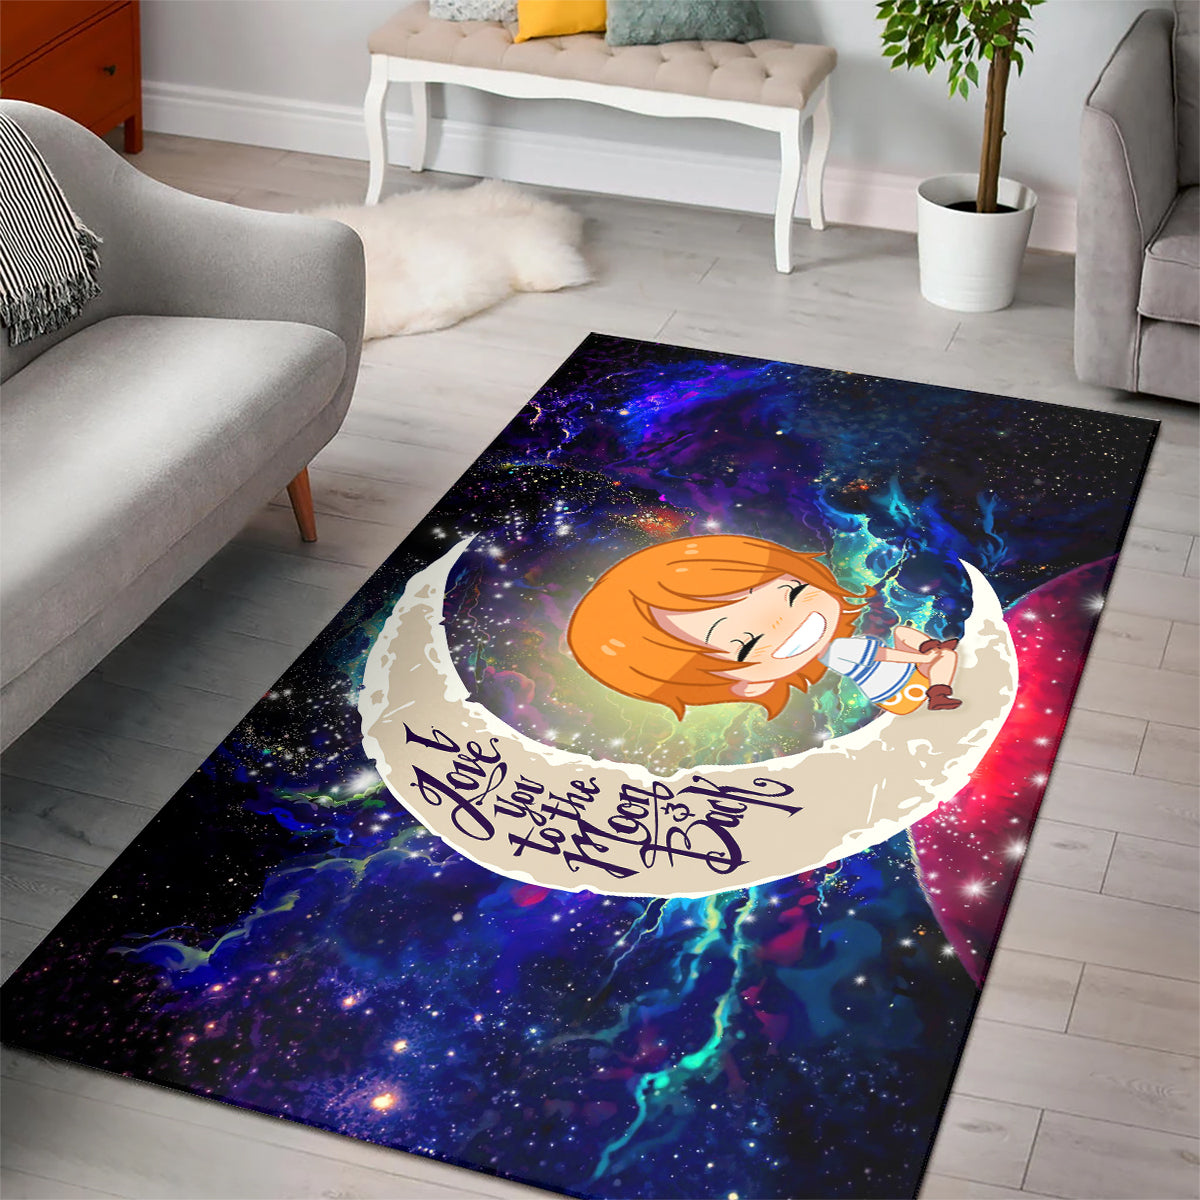 Nami One Piece Love You To The Moon Galaxy Carpet Rug Home Room Decor